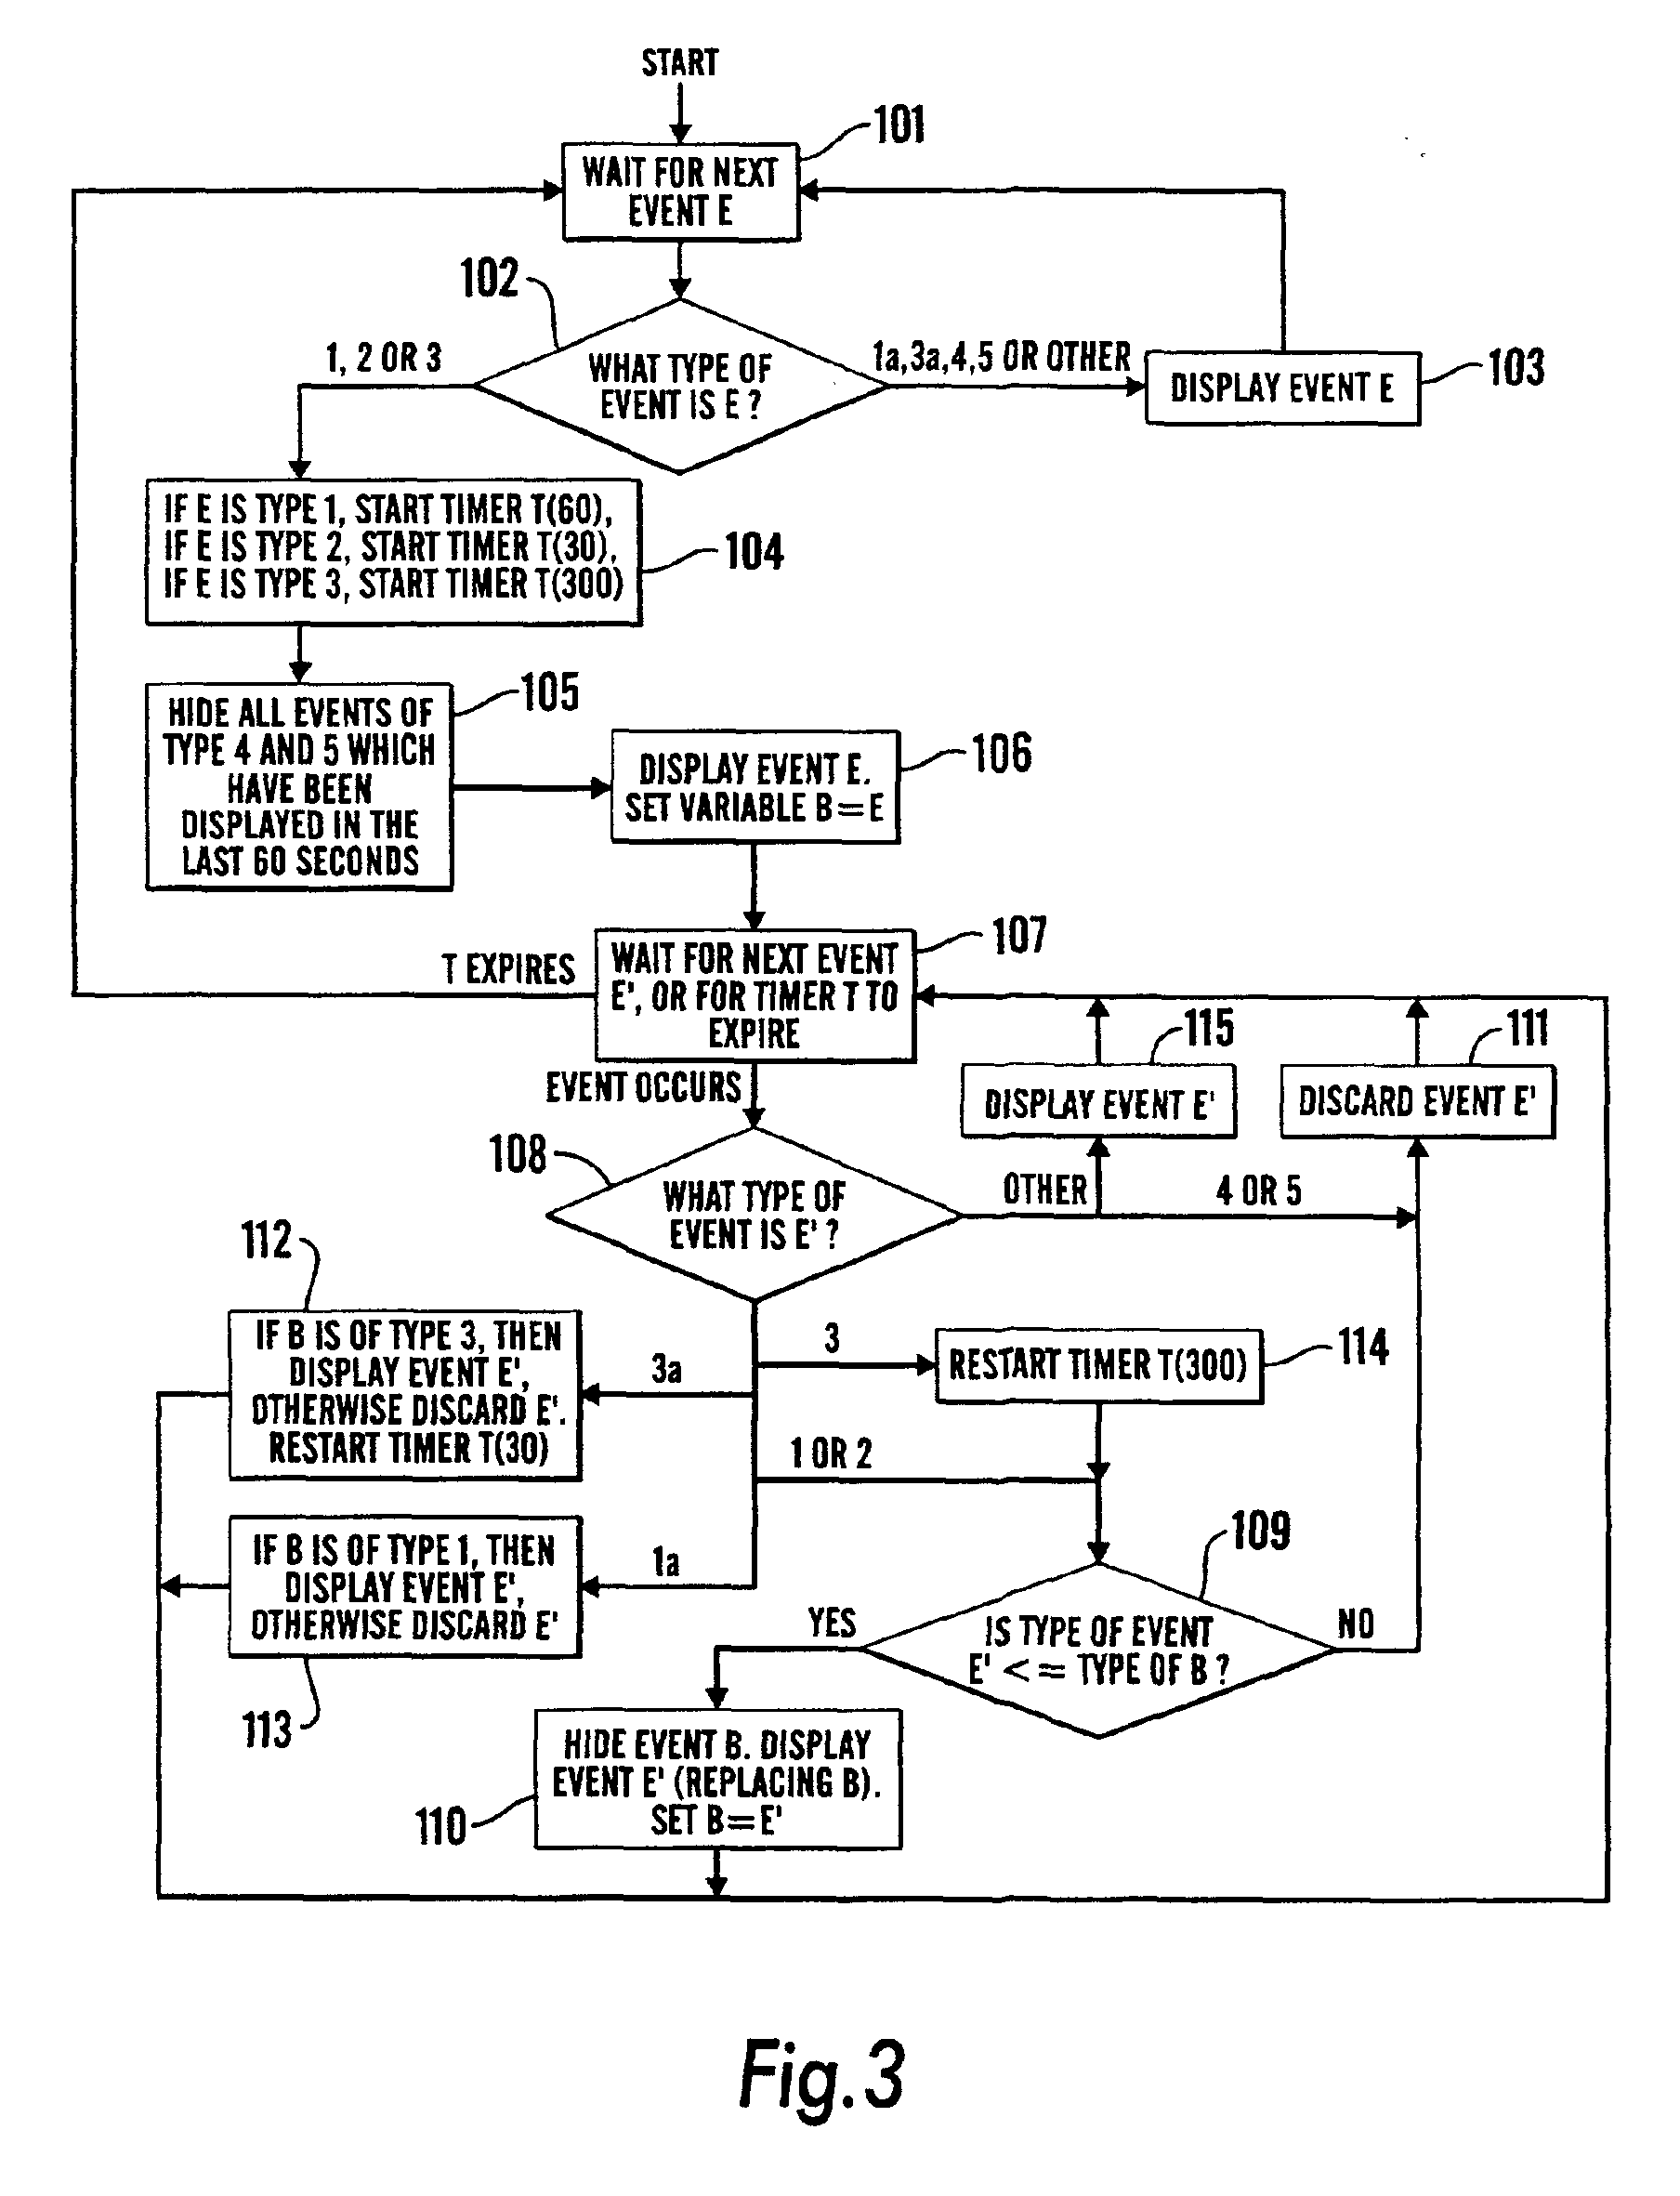 Network management apparatus and method for processing events associated with device reboot